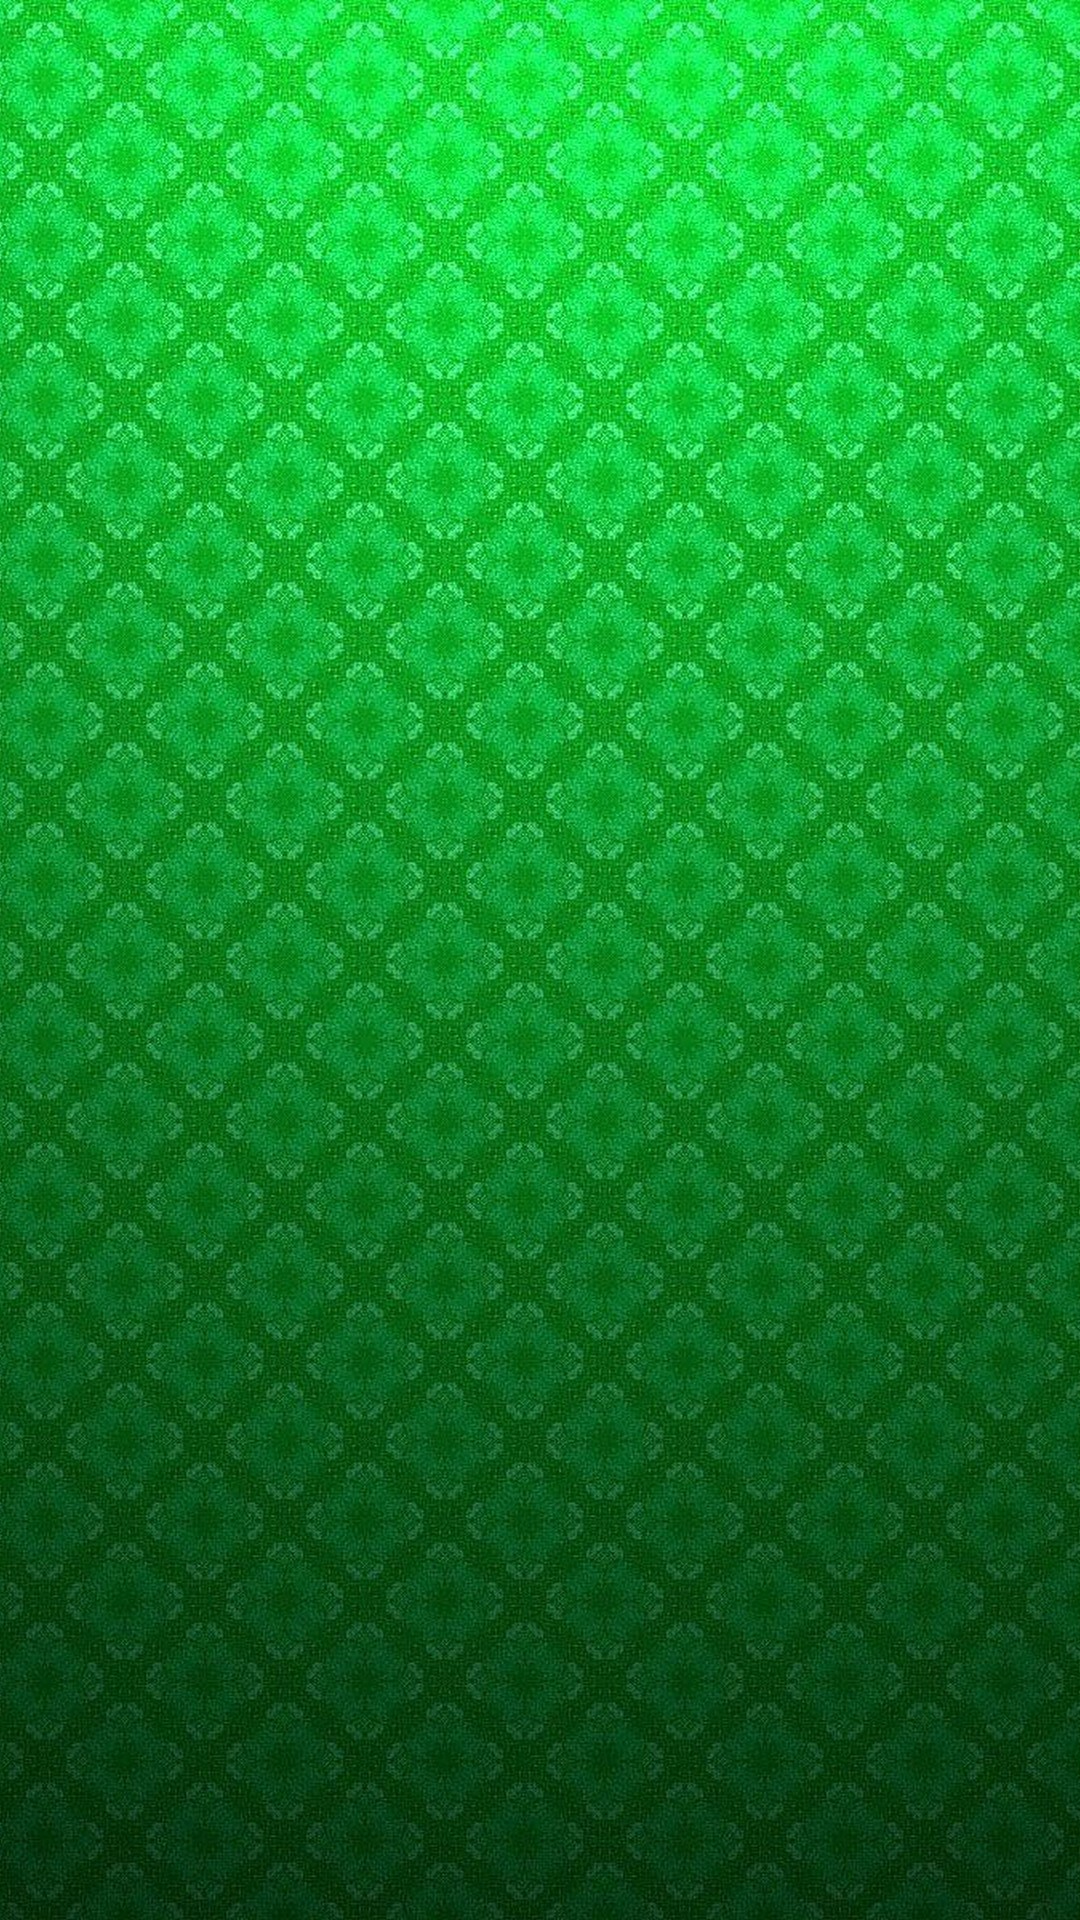 Dark Green Wallpaper For Android with image resolution 1080x1920 pixel. You can make this wallpaper for your Android backgrounds, Tablet, Smartphones Screensavers and Mobile Phone Lock Screen